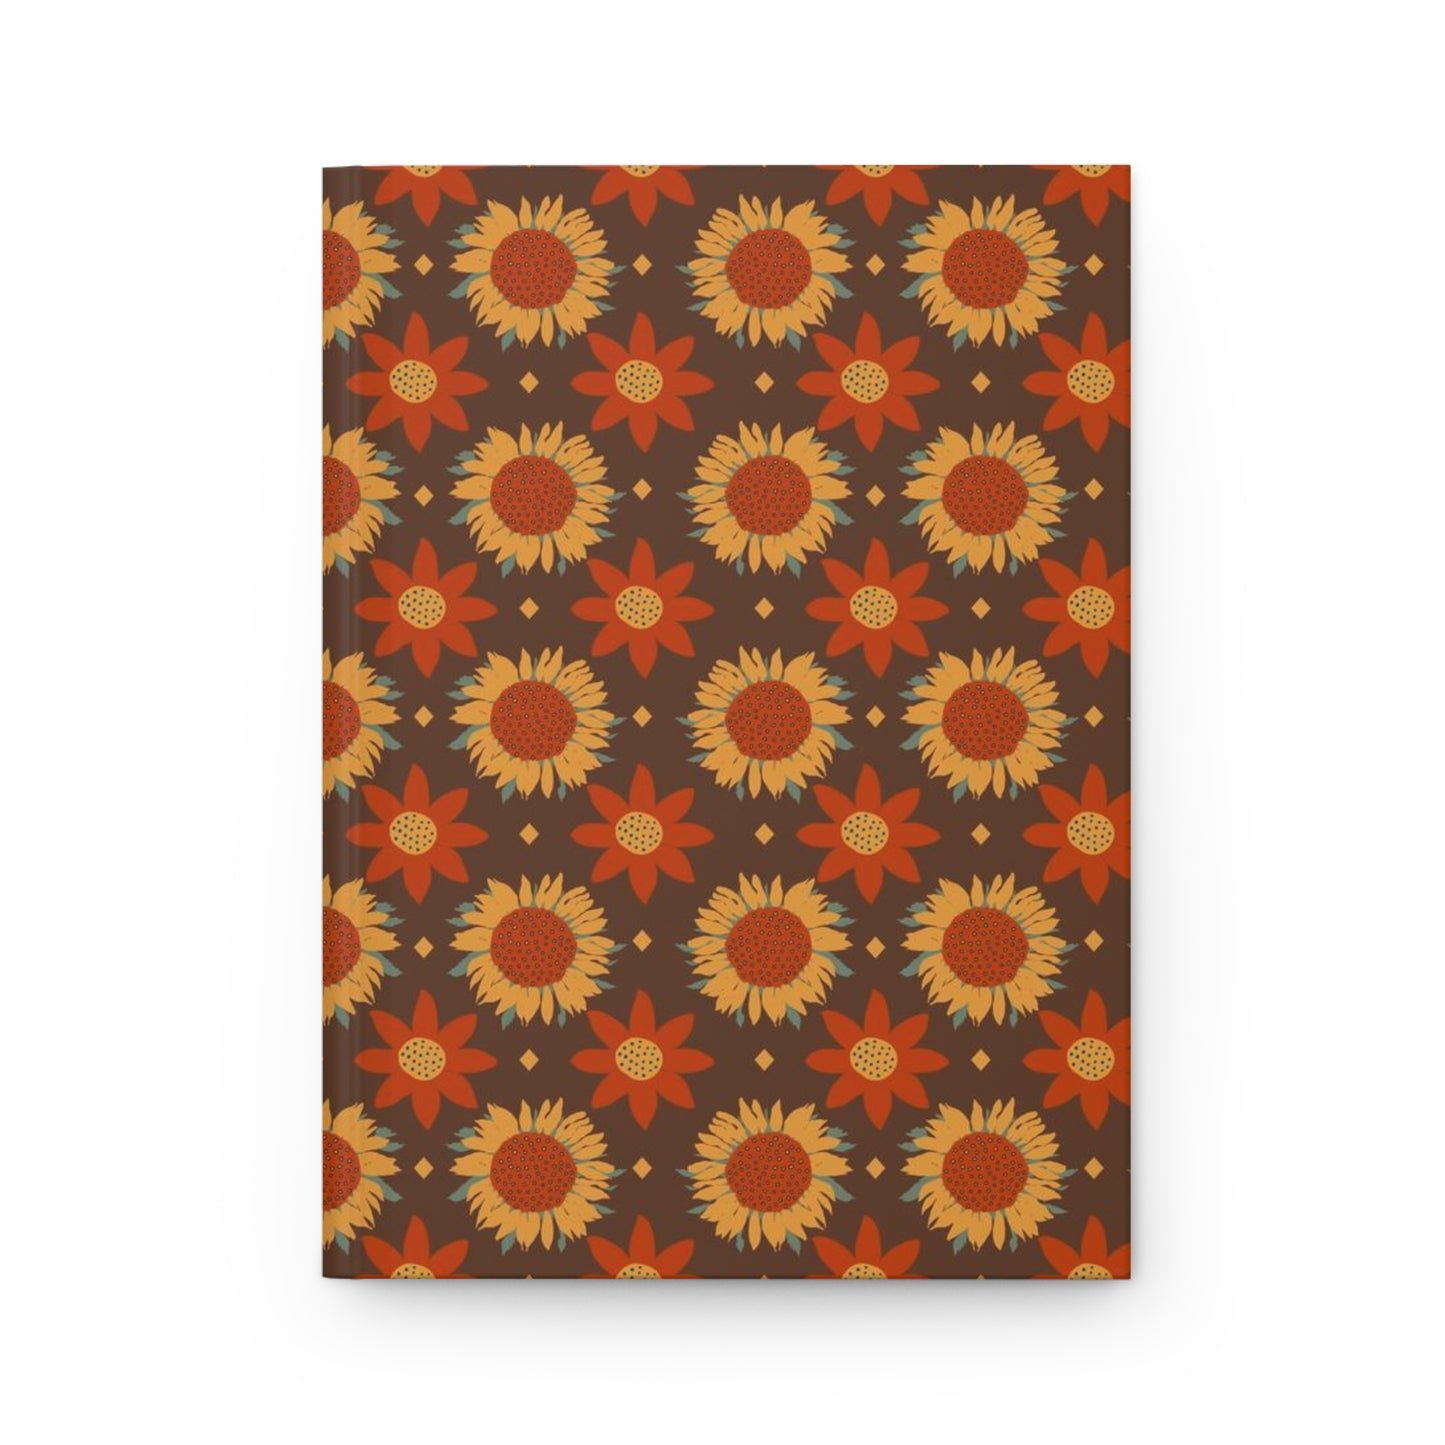 Retro Gold Sunflowers on Brown Background Hardcover Journal Matte